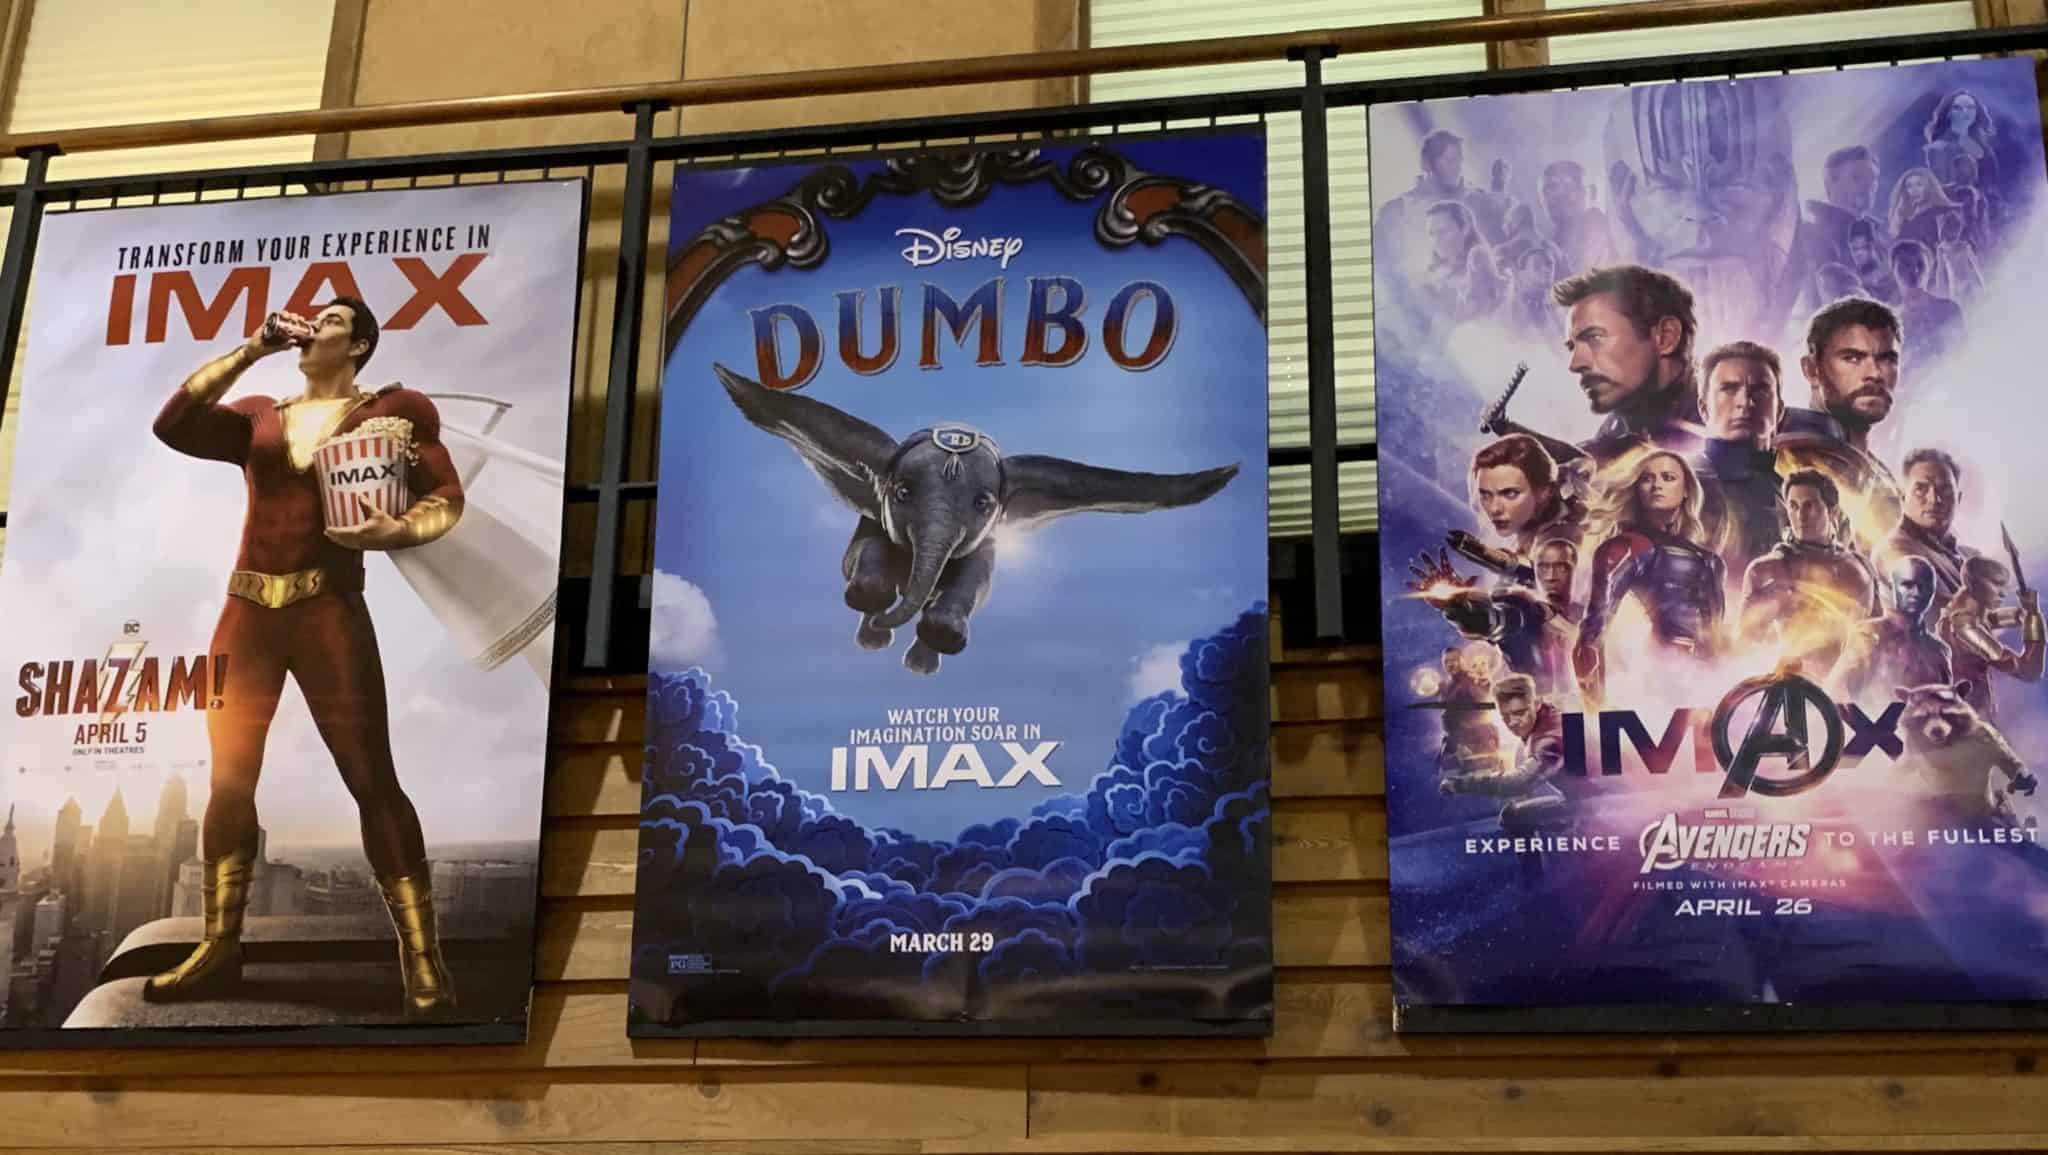 Shows playing at the Branson IMAX Entertainment Complex